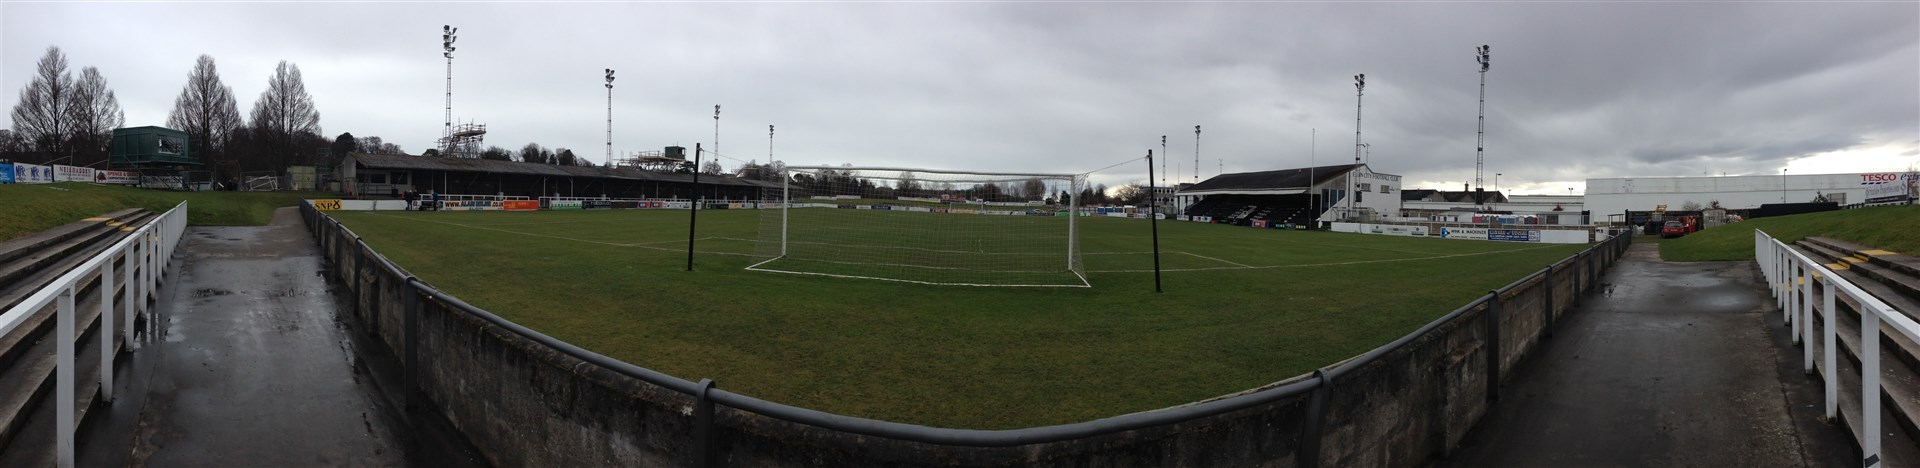 Elgin City were in contention for promotion before the coronavirus outbreak shut down Scottish football.